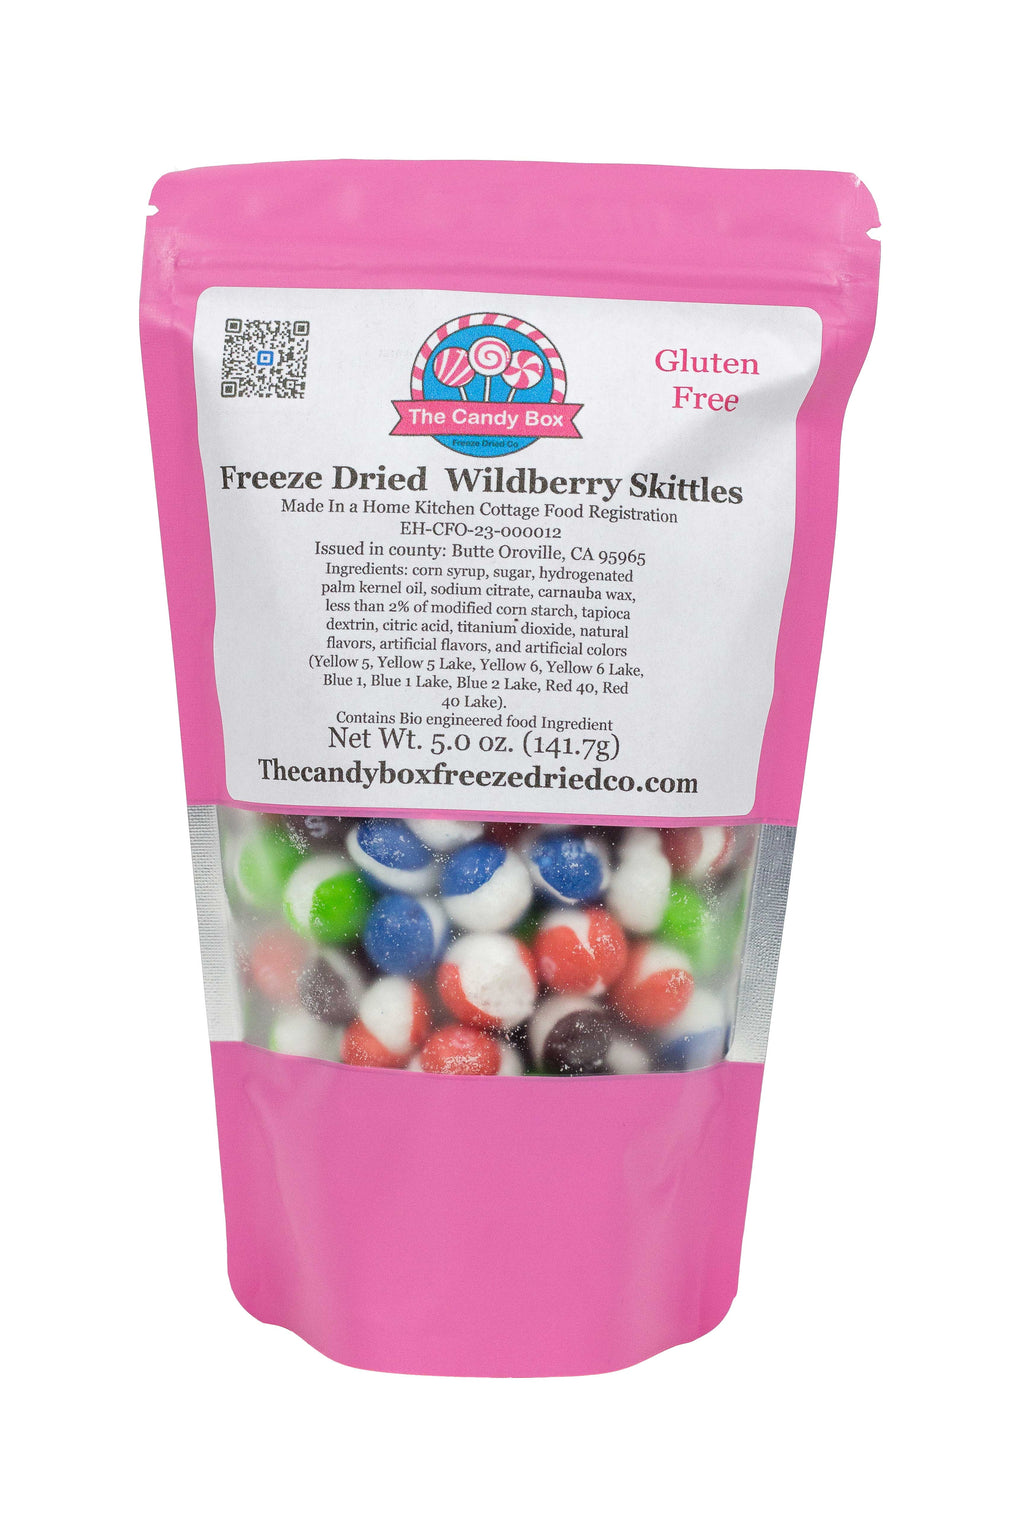 Freeze Dried Wild Berry "Skiddles" by The Candy Box Freeze Dried Co.